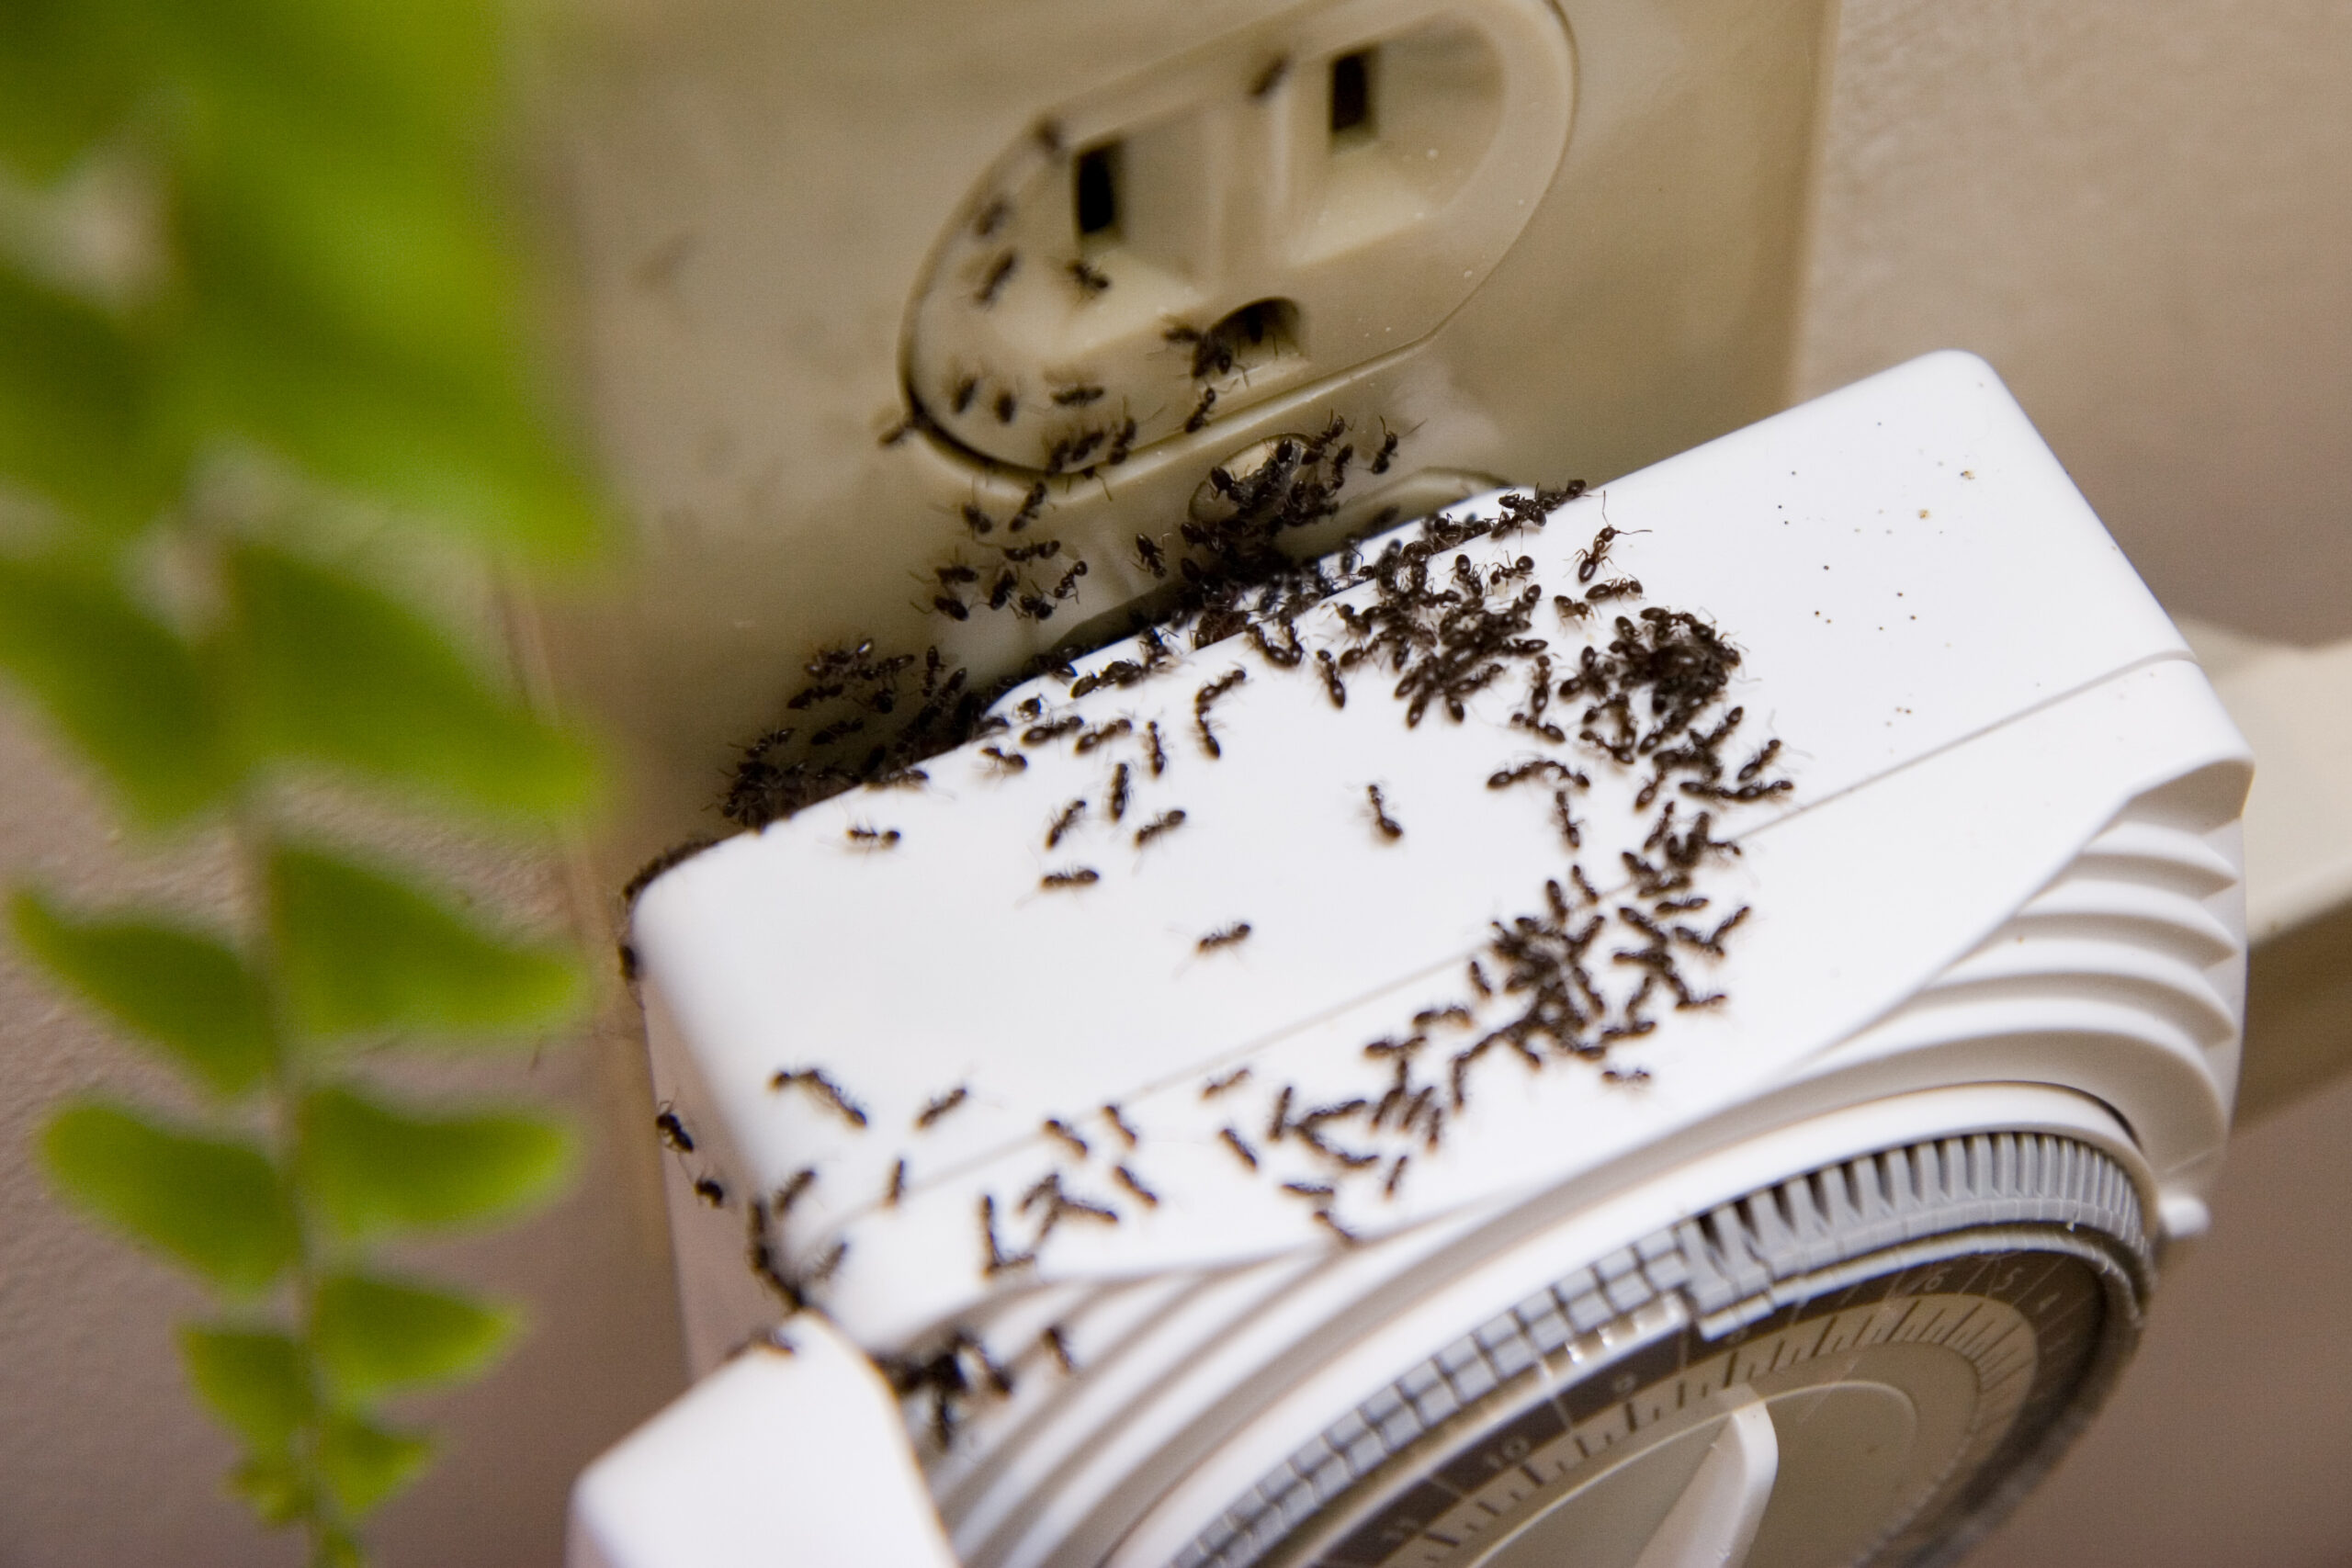 Ants on Electrical Outlet